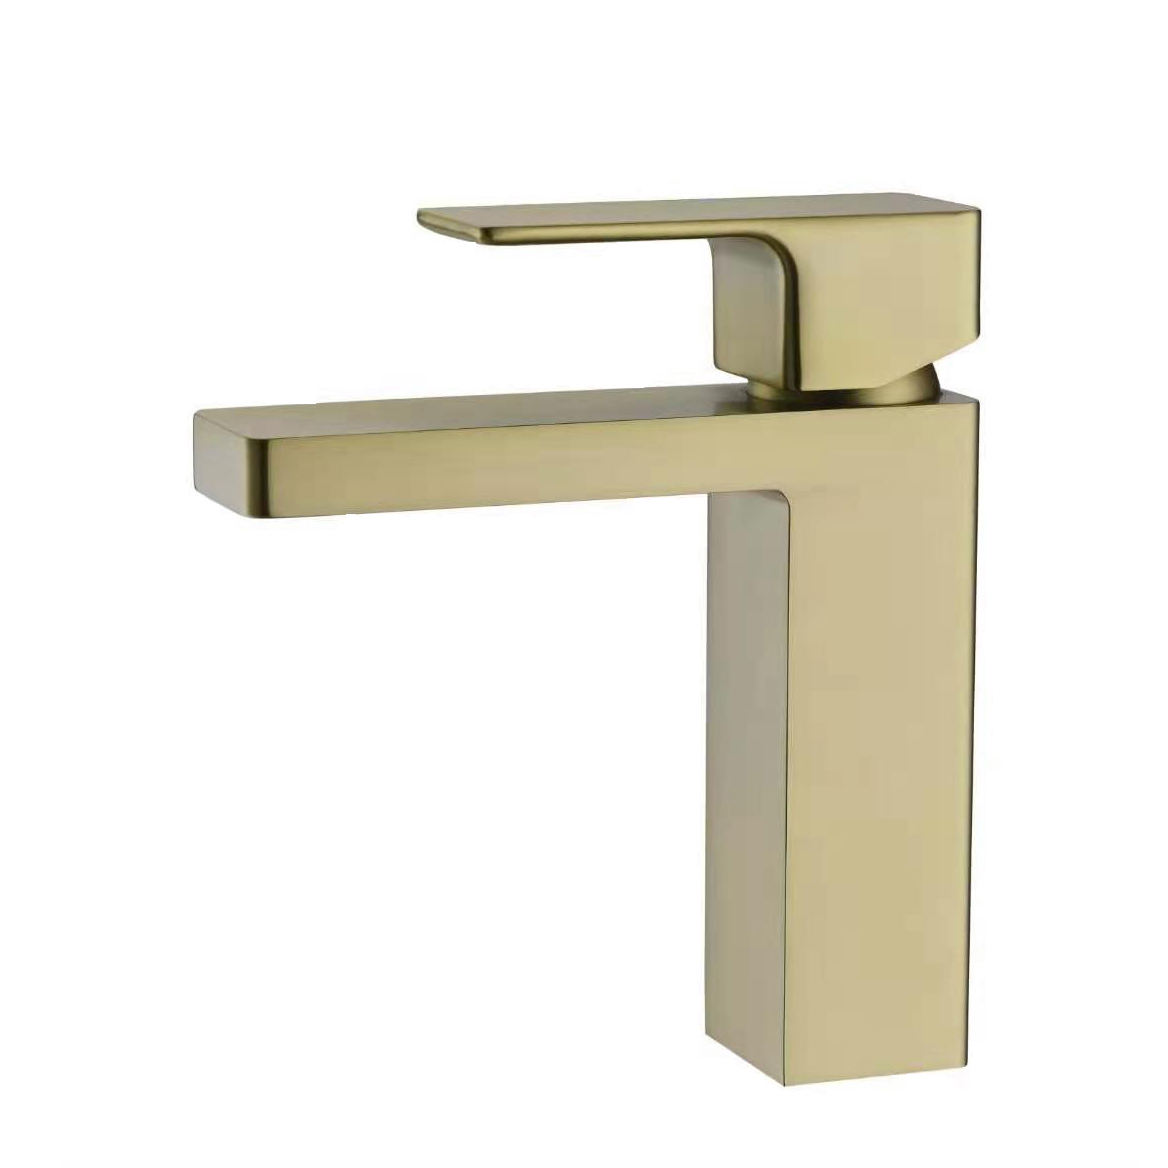 Morden Design Single Hole Hot And Cold Wash Bathroom Mixer Basin Tap Brass Faucet Washroom Taps